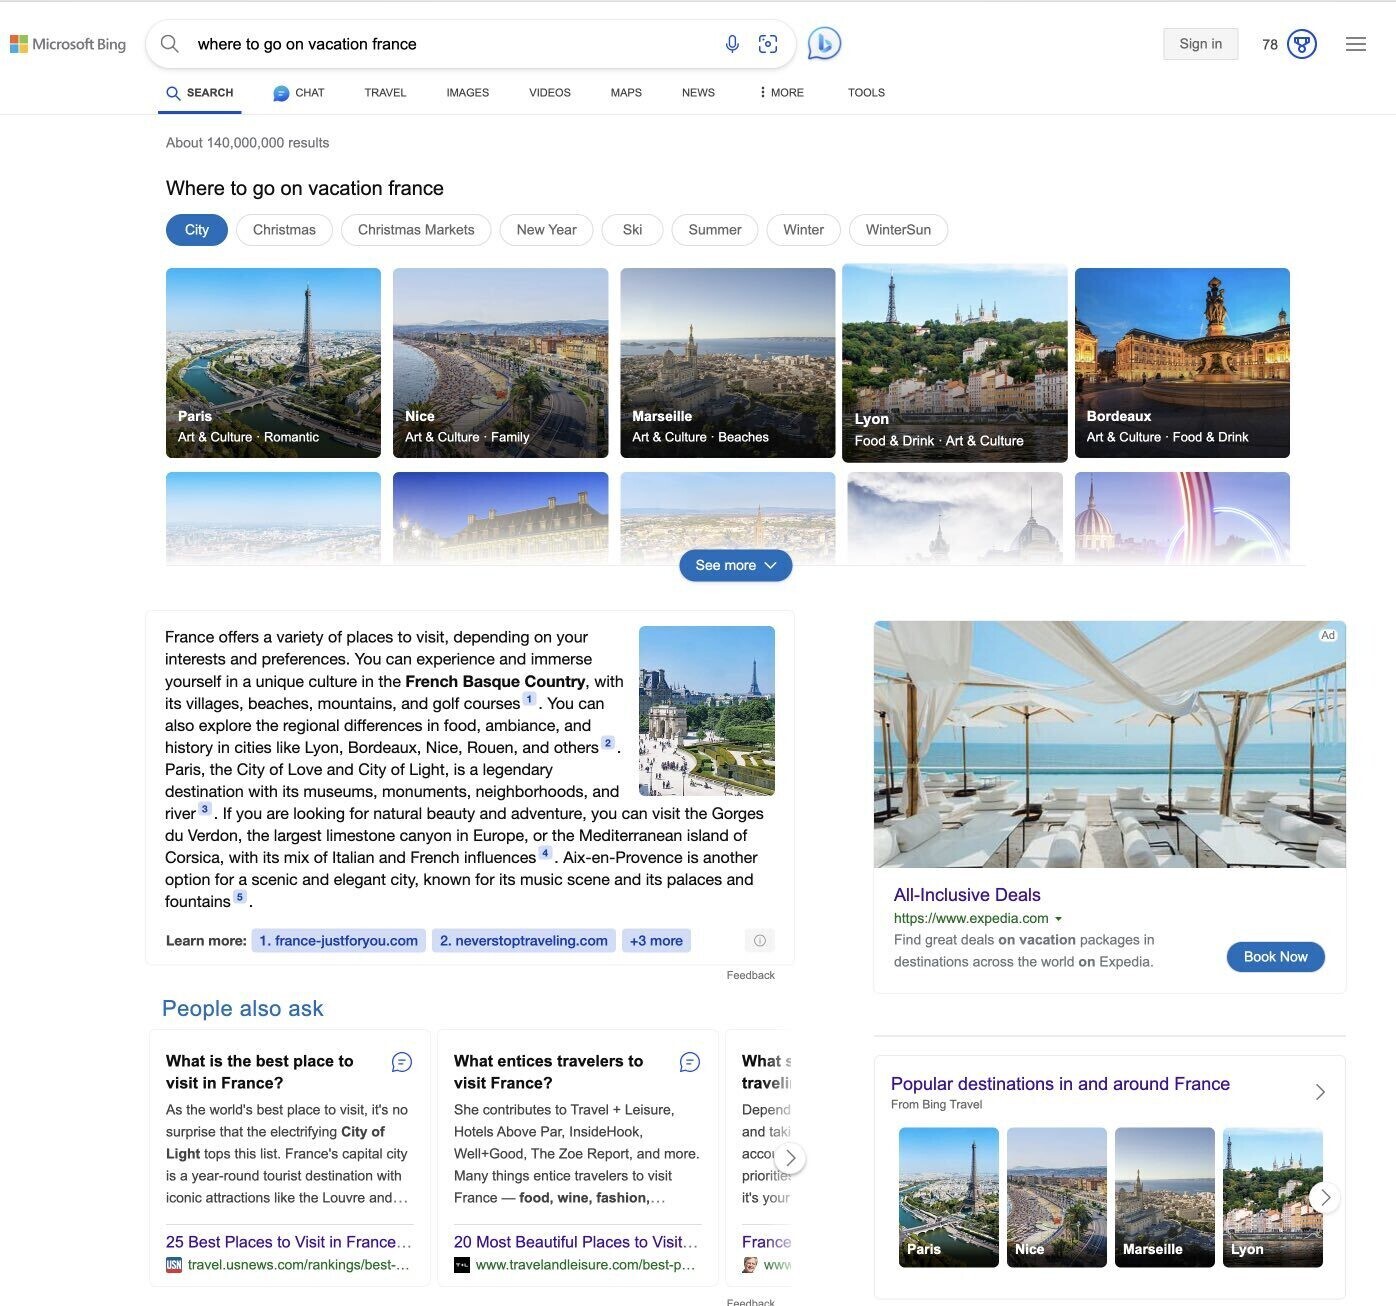 Bing SERP for “where to go on vacation france” with a summary of travel advice generated by AI